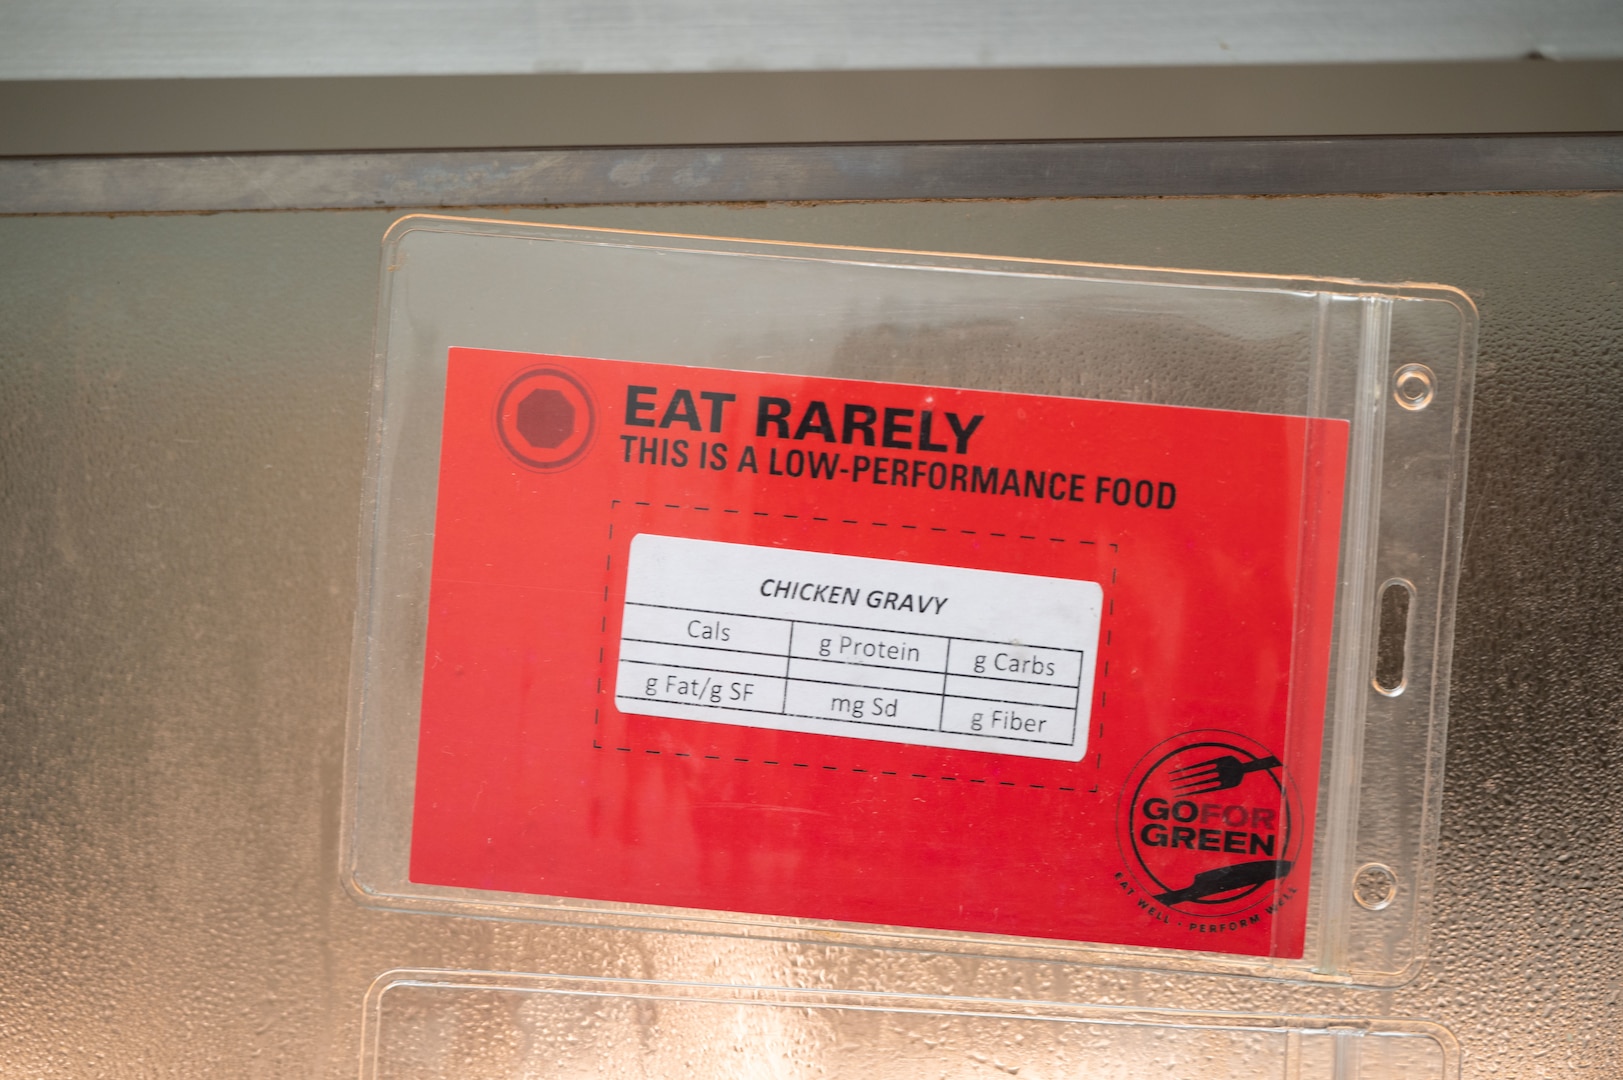 red "eat rarely" sign on the low-performance foods